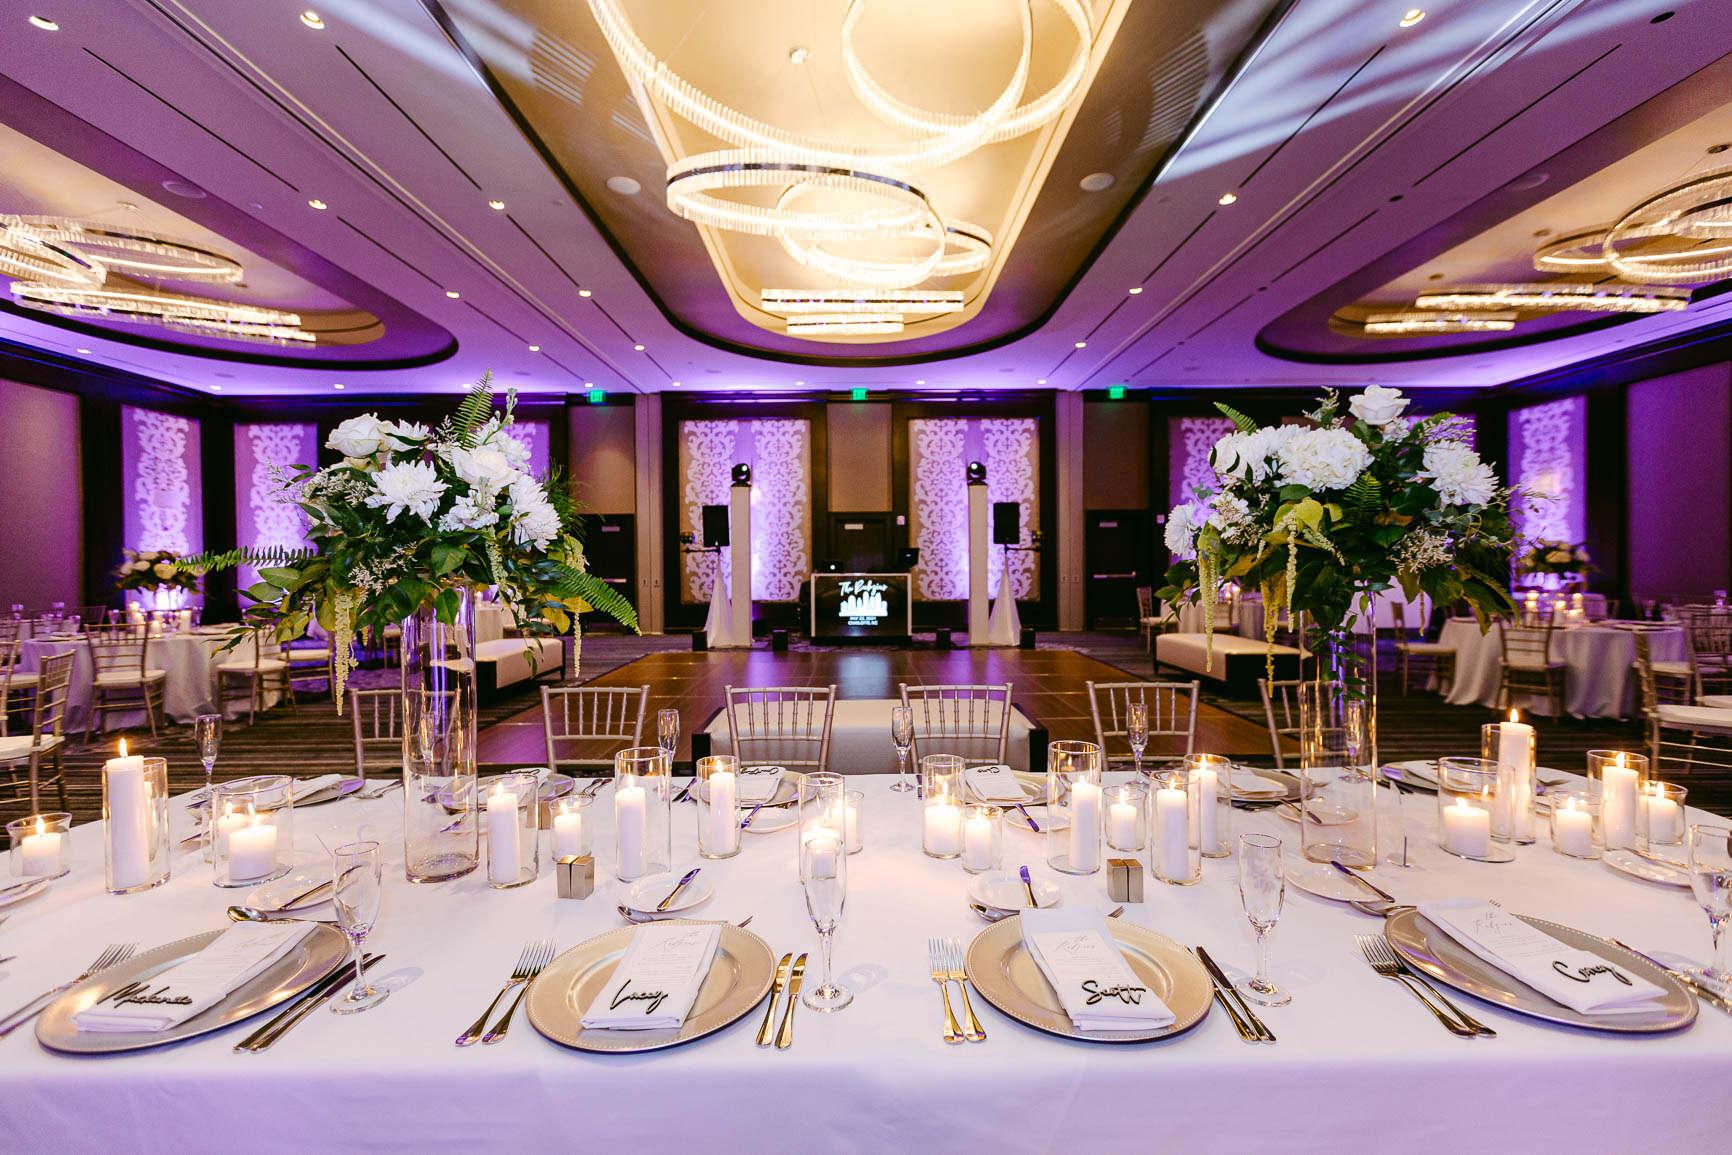 uptown Charlotte wedding reception by Nhieu Tang Photography | nhieutang.com